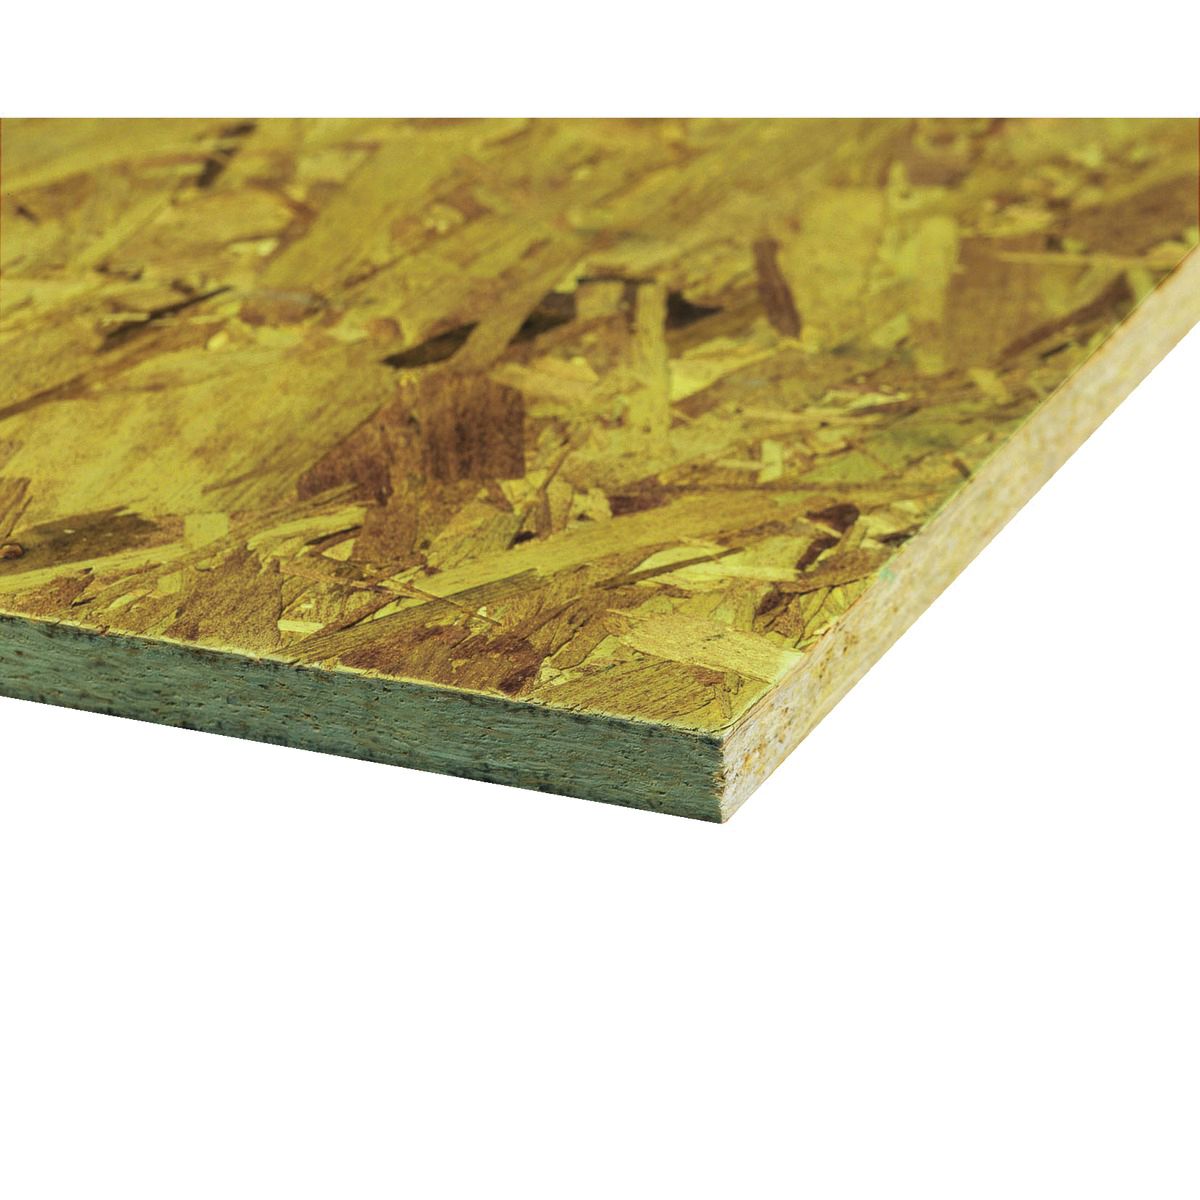 Image of Wickes General Purpose Oriented Strand Board 3 (OSB 3) - 9 x 606 x 1220mm